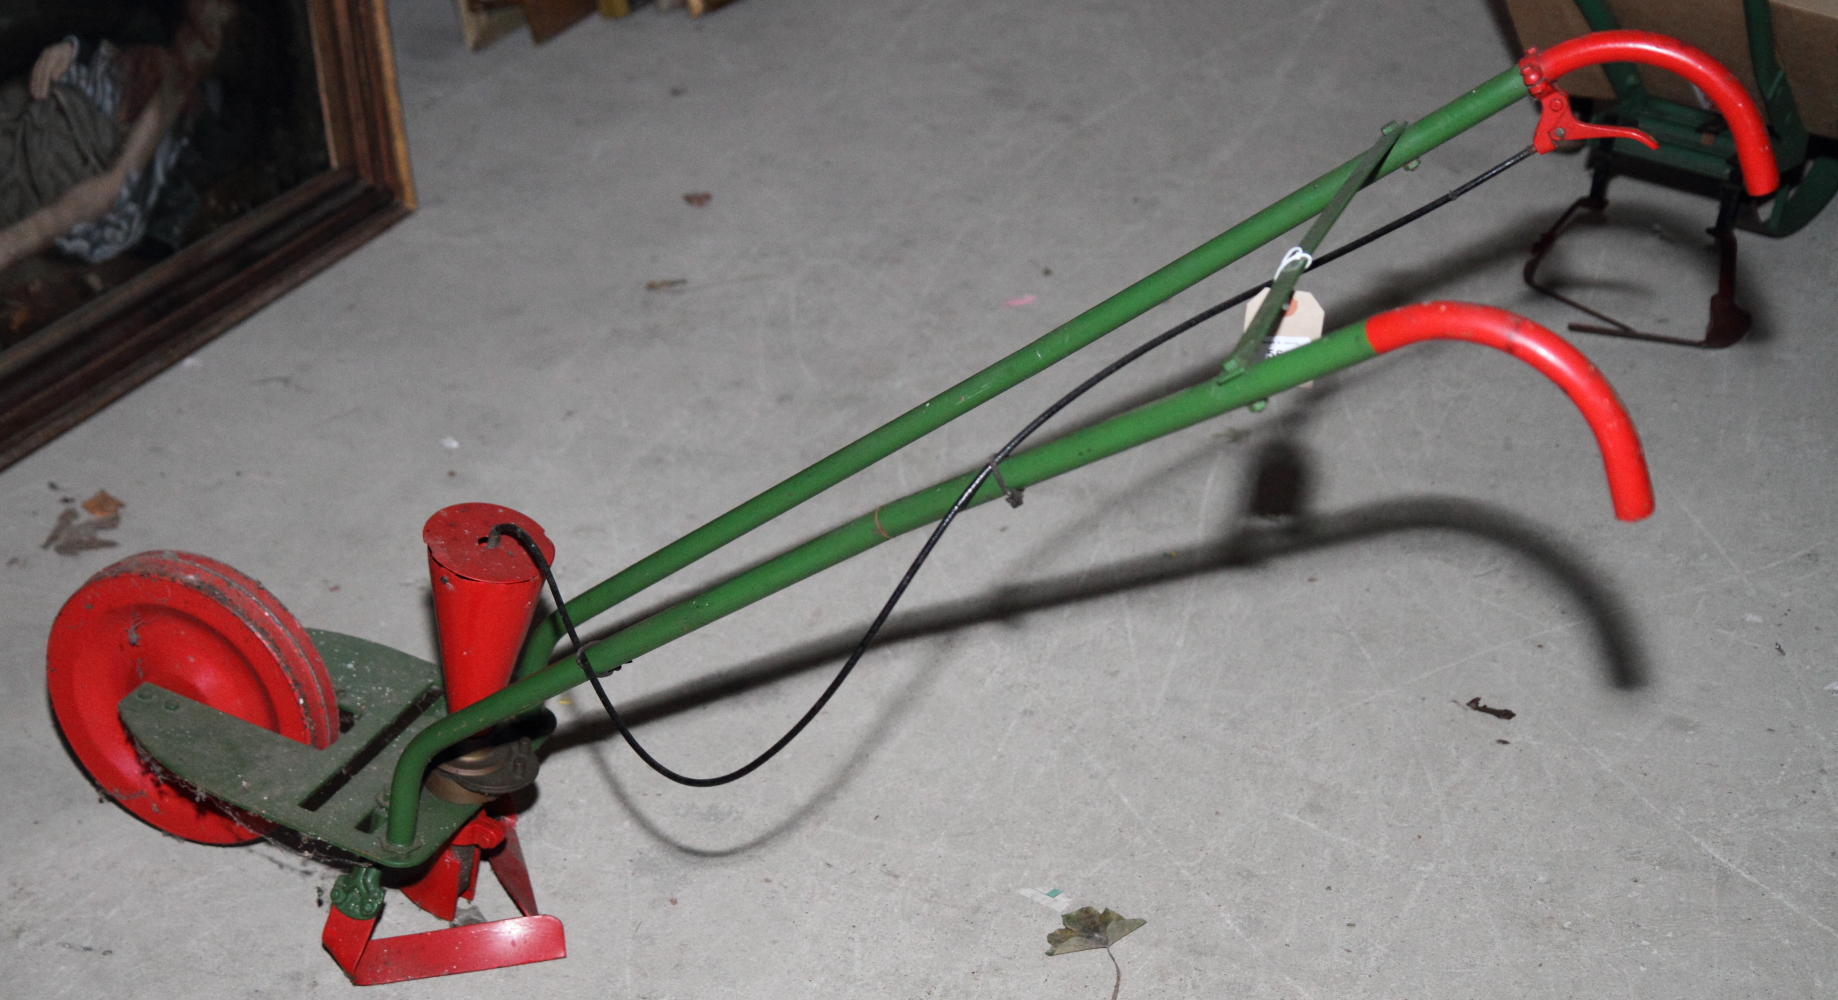 A red and green painted metal pea seed drill (purchased by Mr Snelson between 1890 and 1900 and used